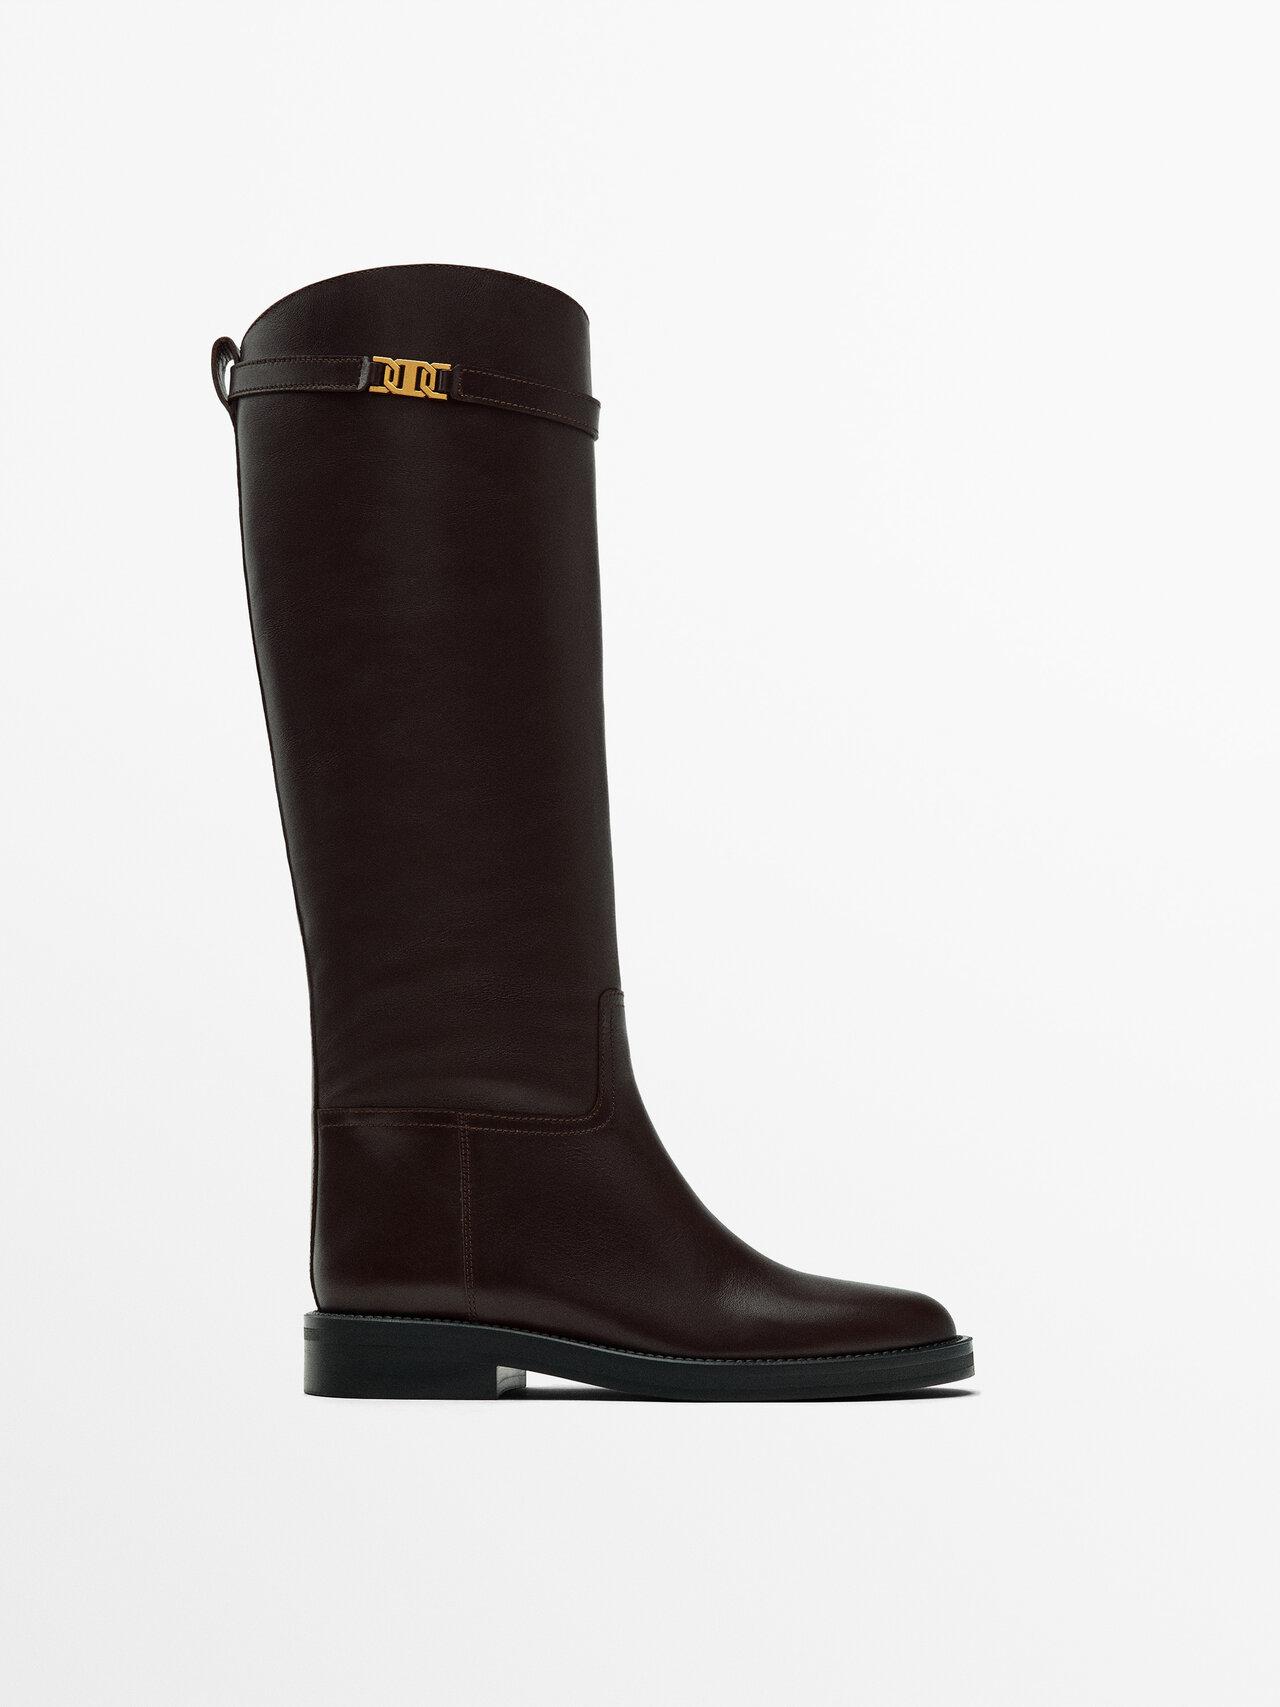 MASSIMO DUTTI Riding-Style Boots in Black | Lyst